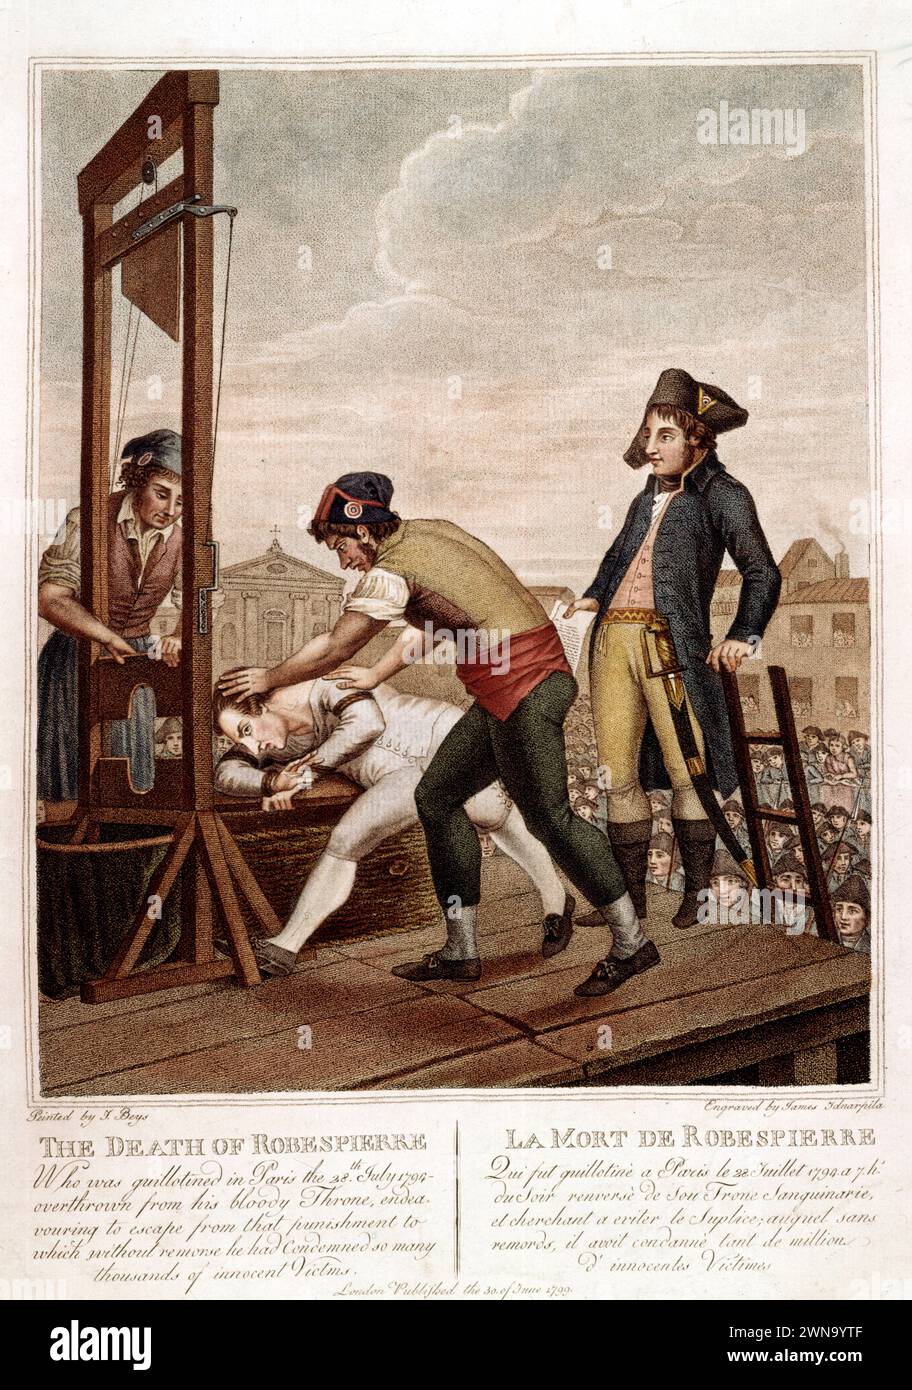 The death of Maximilien Robespierre who was guillotined in Paris on 28 July 1794 at 7 o'clock in the evening. English engraving. 1799. Stock Photo